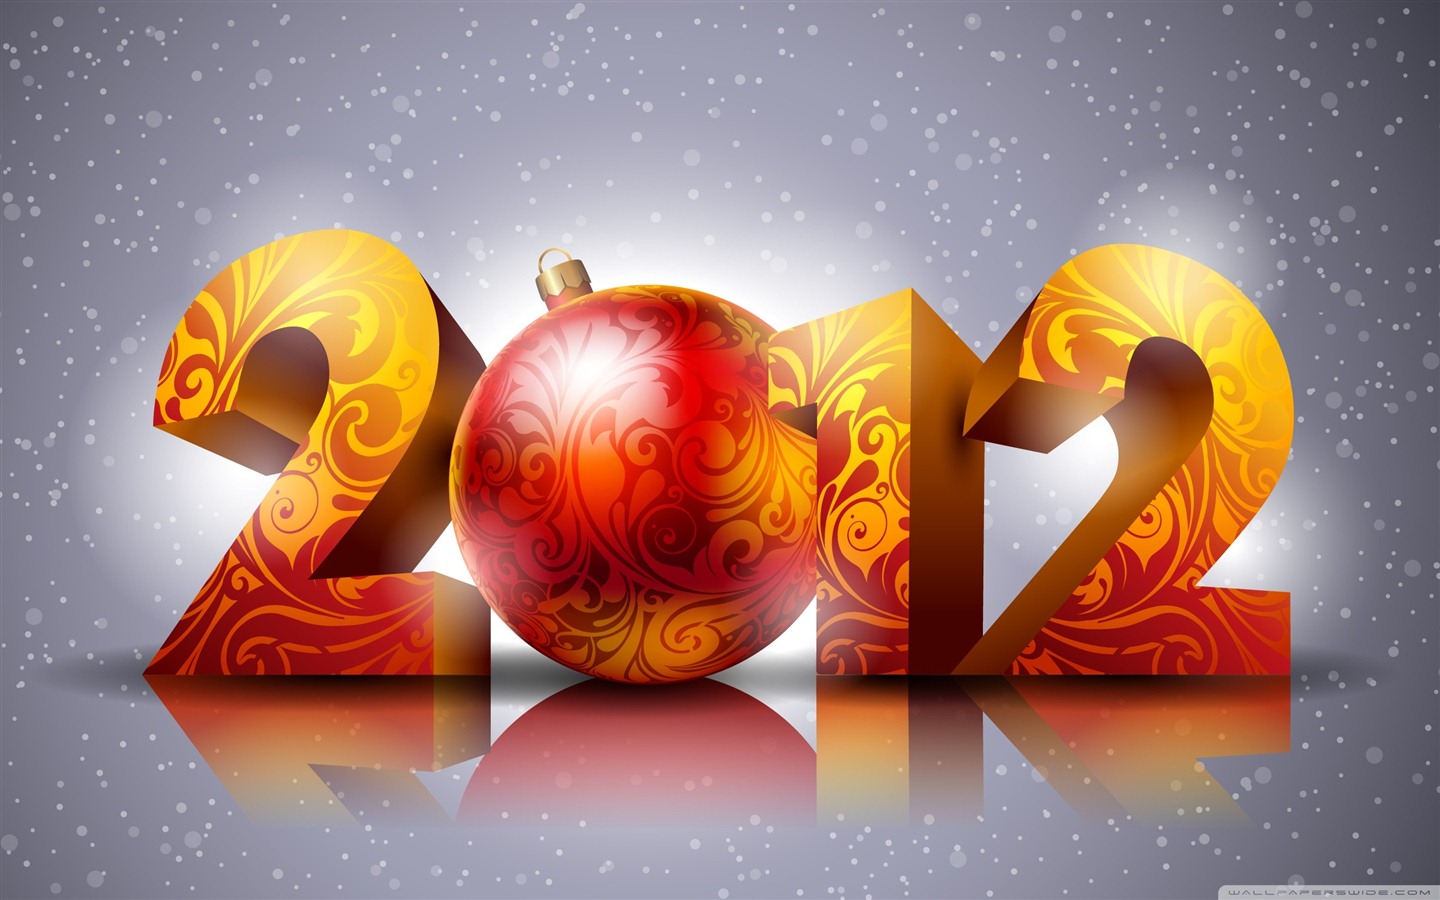 2012 New Year wallpapers (1) #10 - 1440x900